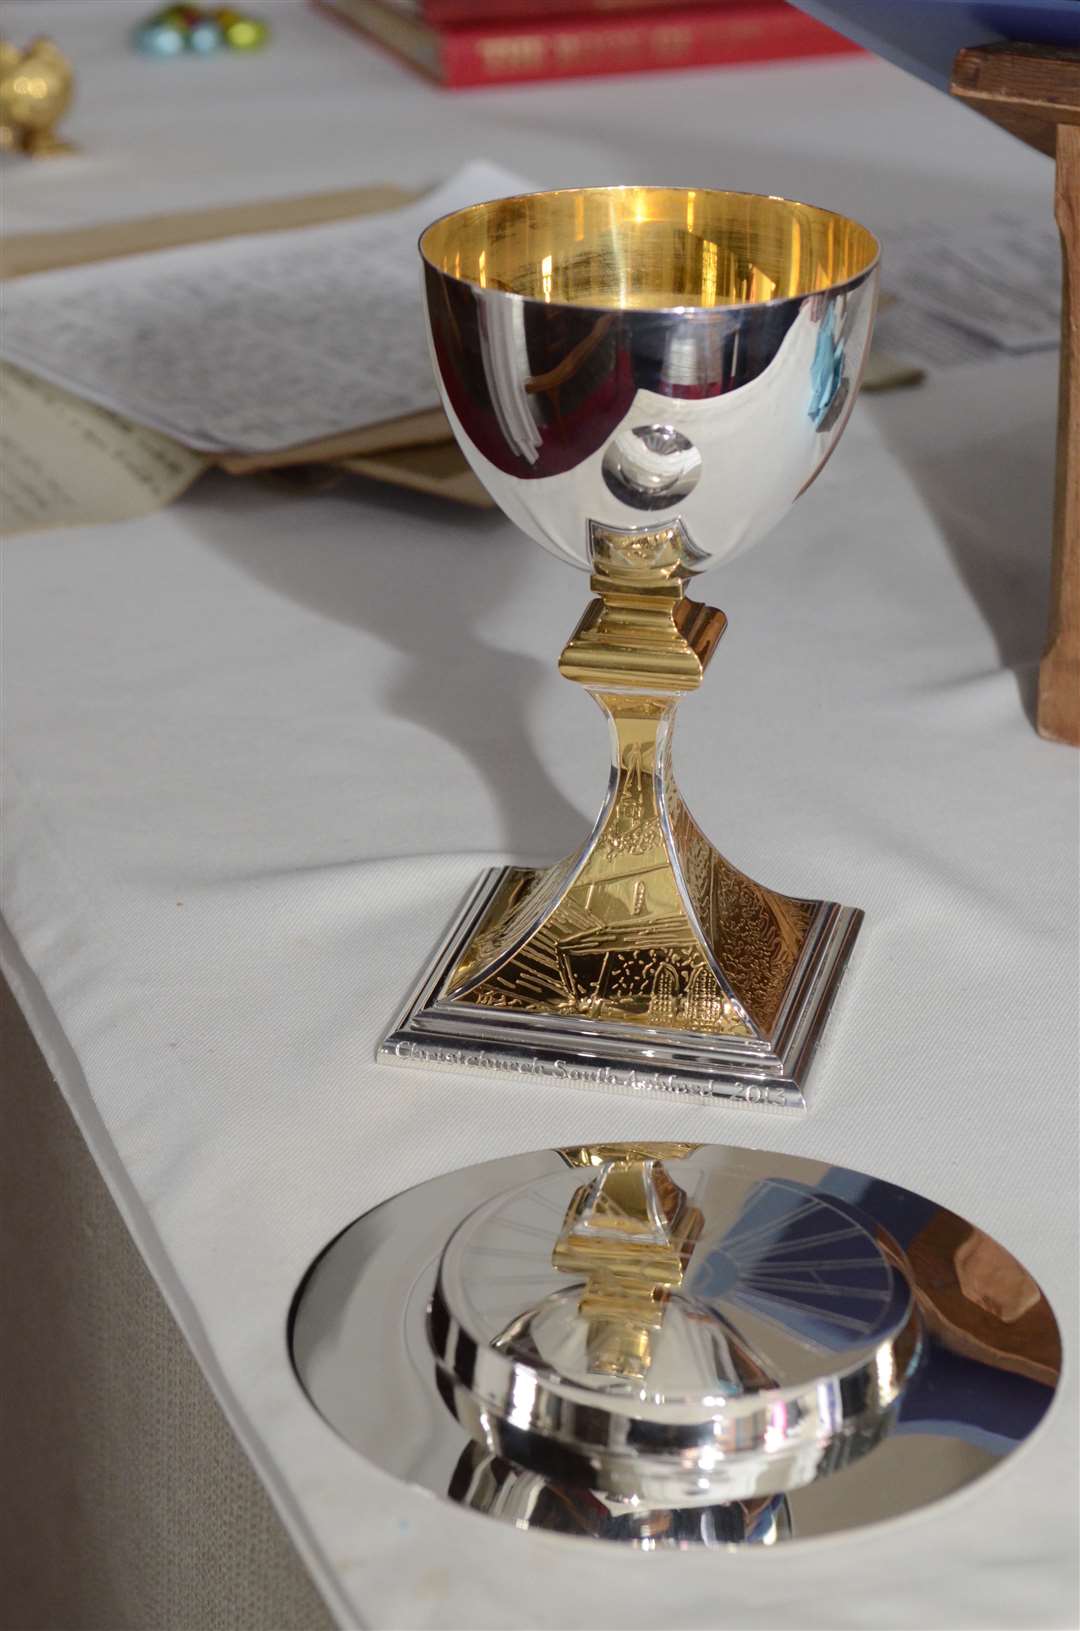 A chalice used to take communion